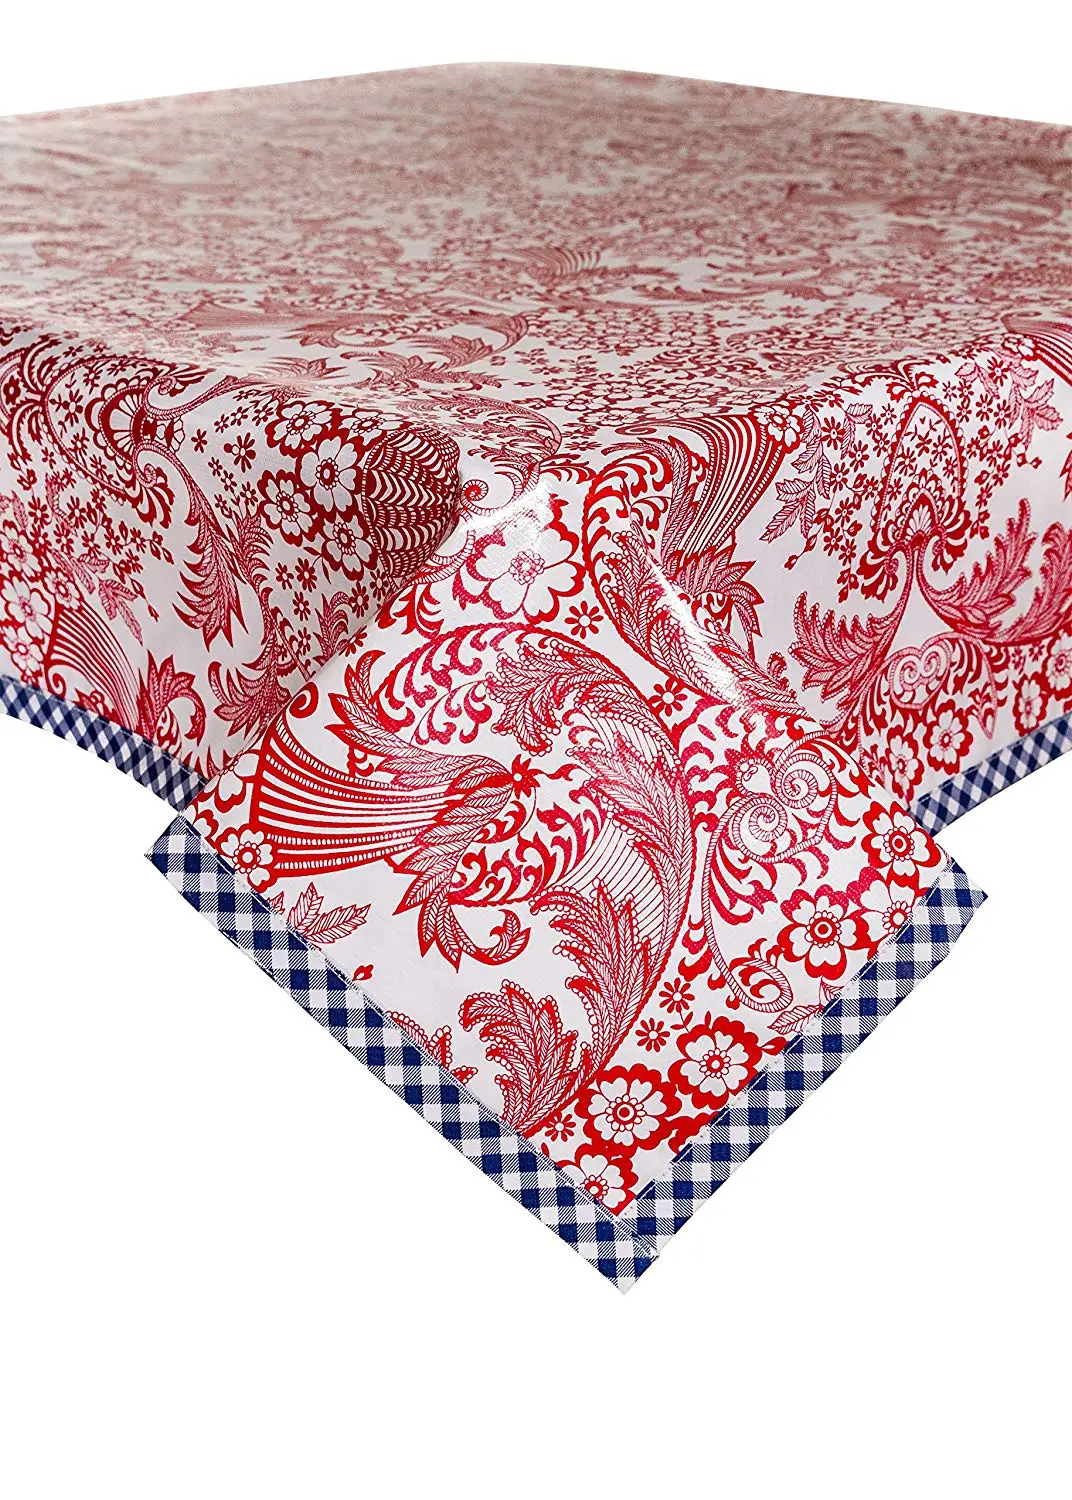 Unique oilcloth tablecloth oval Cheap Oilcloth Tablecloth Oval Find Deals On Line At Alibaba Com